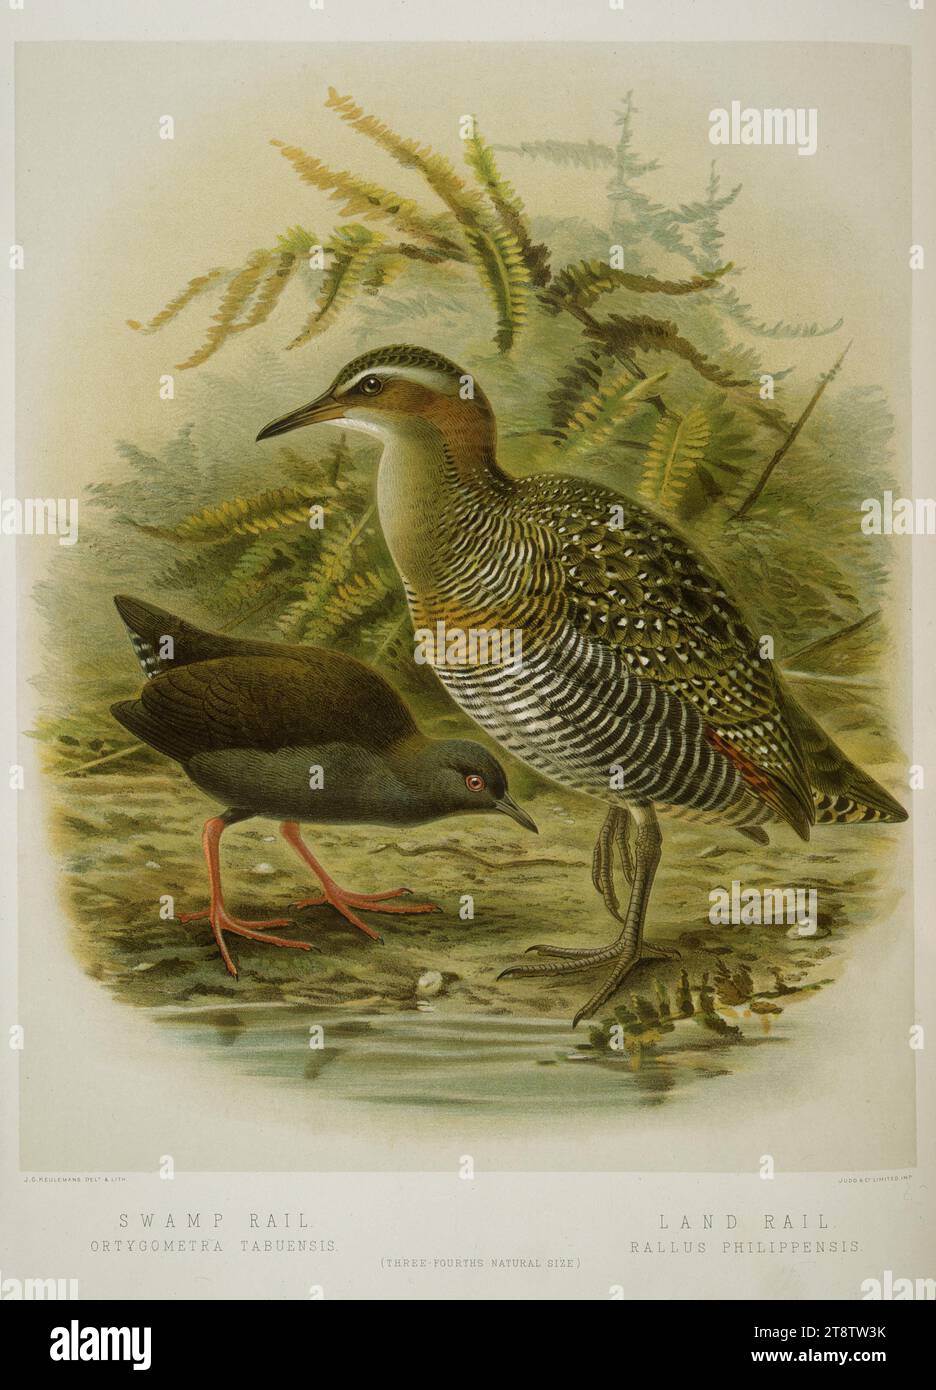 Keulemans, John Gerrard, 1842-1912: Swamp rail. Land rail / J. G. Keulemans delt. & lith. Plate XXXIII. 1888, Shows the banded land rail (rallus philippensis) in the right foreground, and the smaller darker red-legged swamp rail (ortygometra tabuensis) at the left Stock Photo